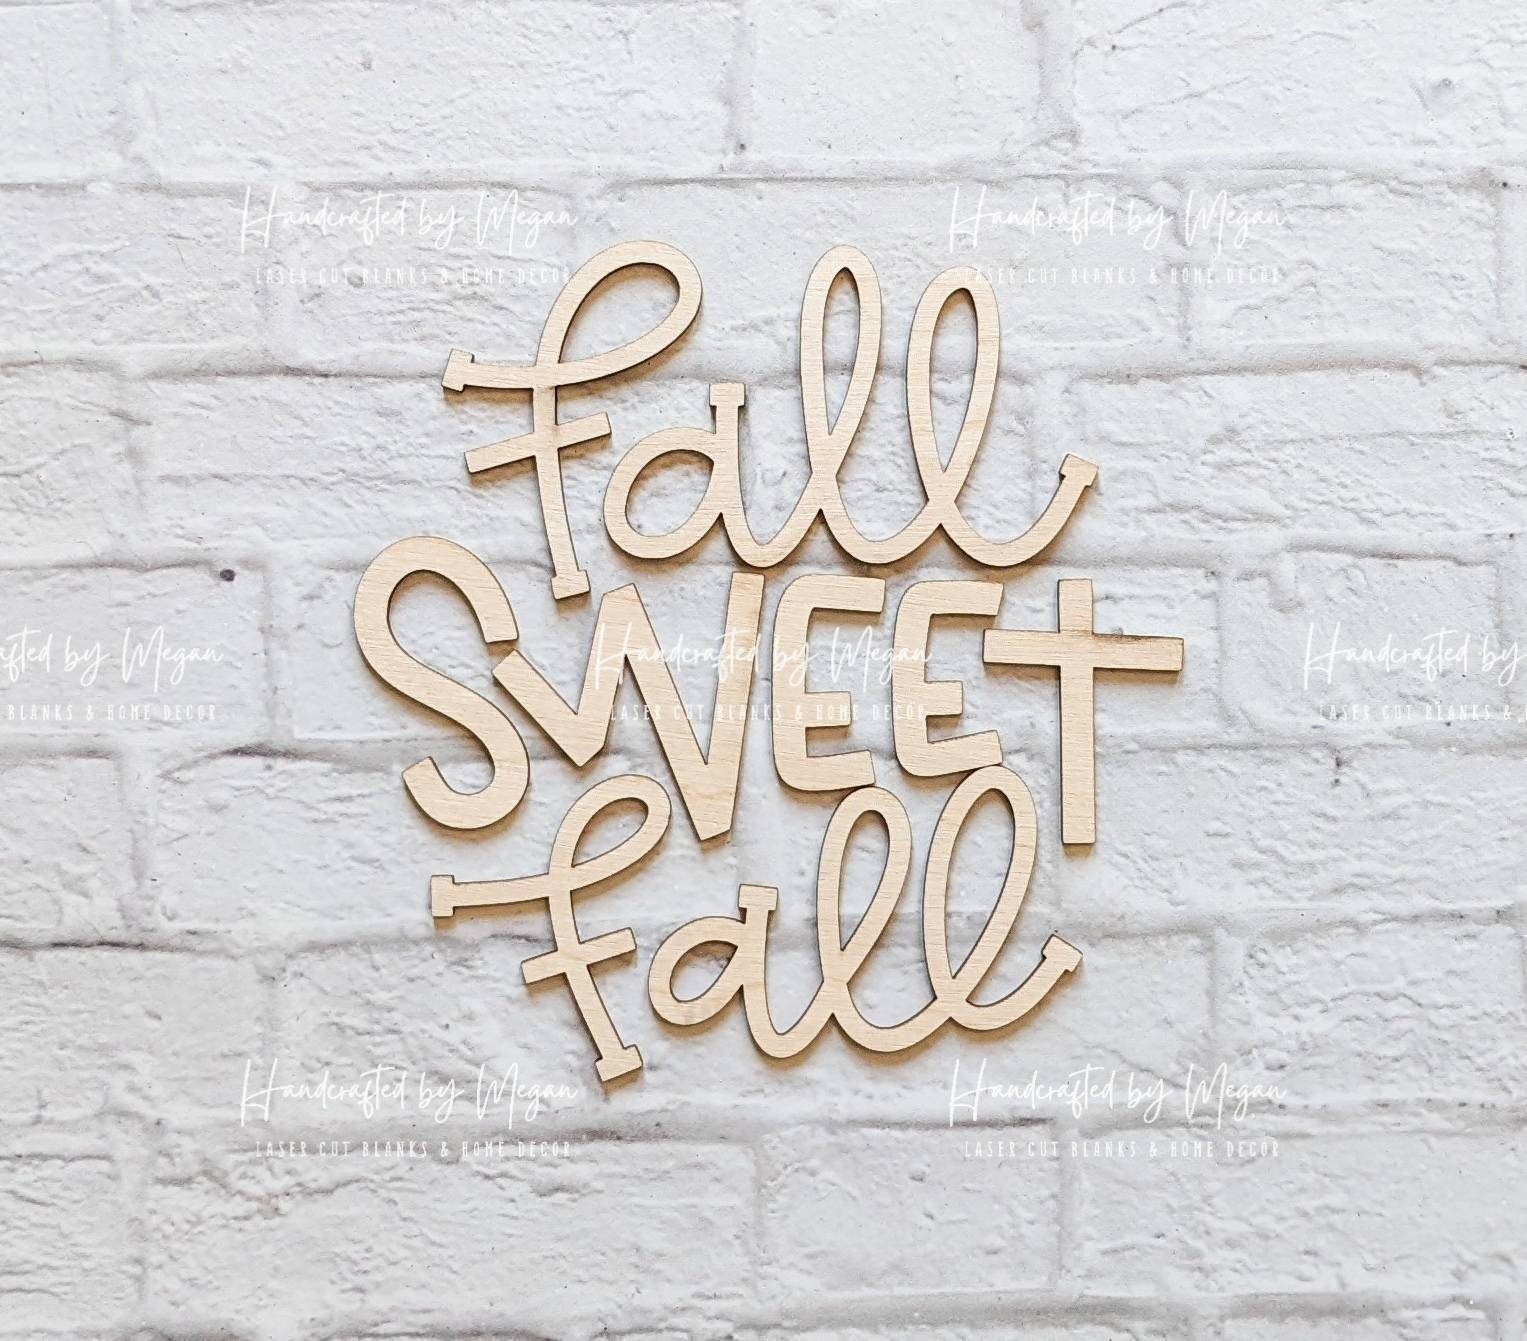 Fall Sweet Fall set - Various Sizes - Wooden Blanks- Wooden Shapes - laser cut shape - Seasonal Rounds